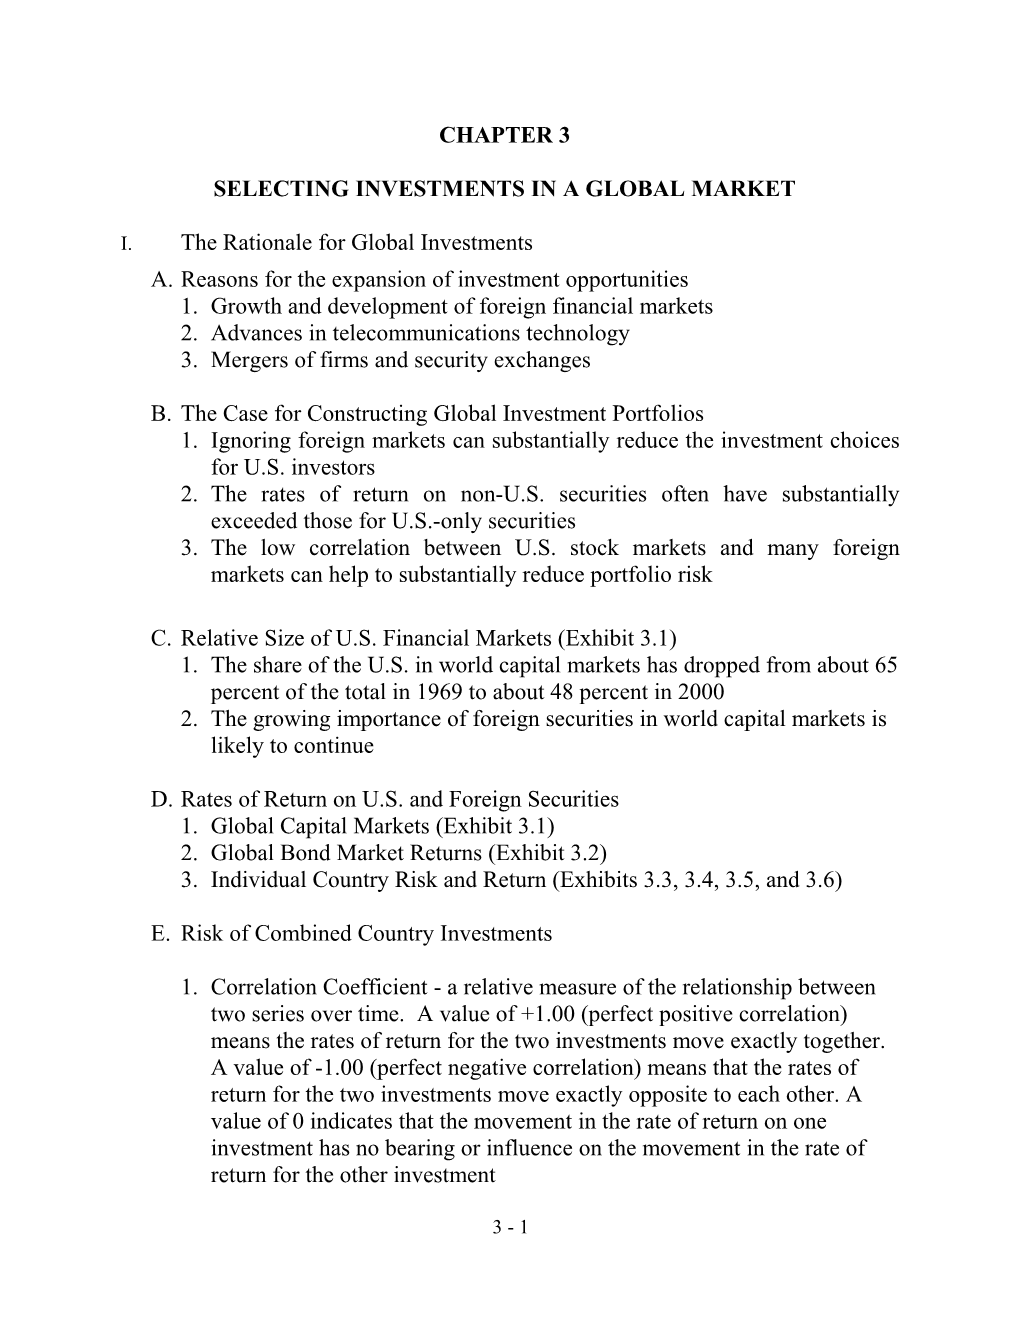 Selecting Investments in a Global Market